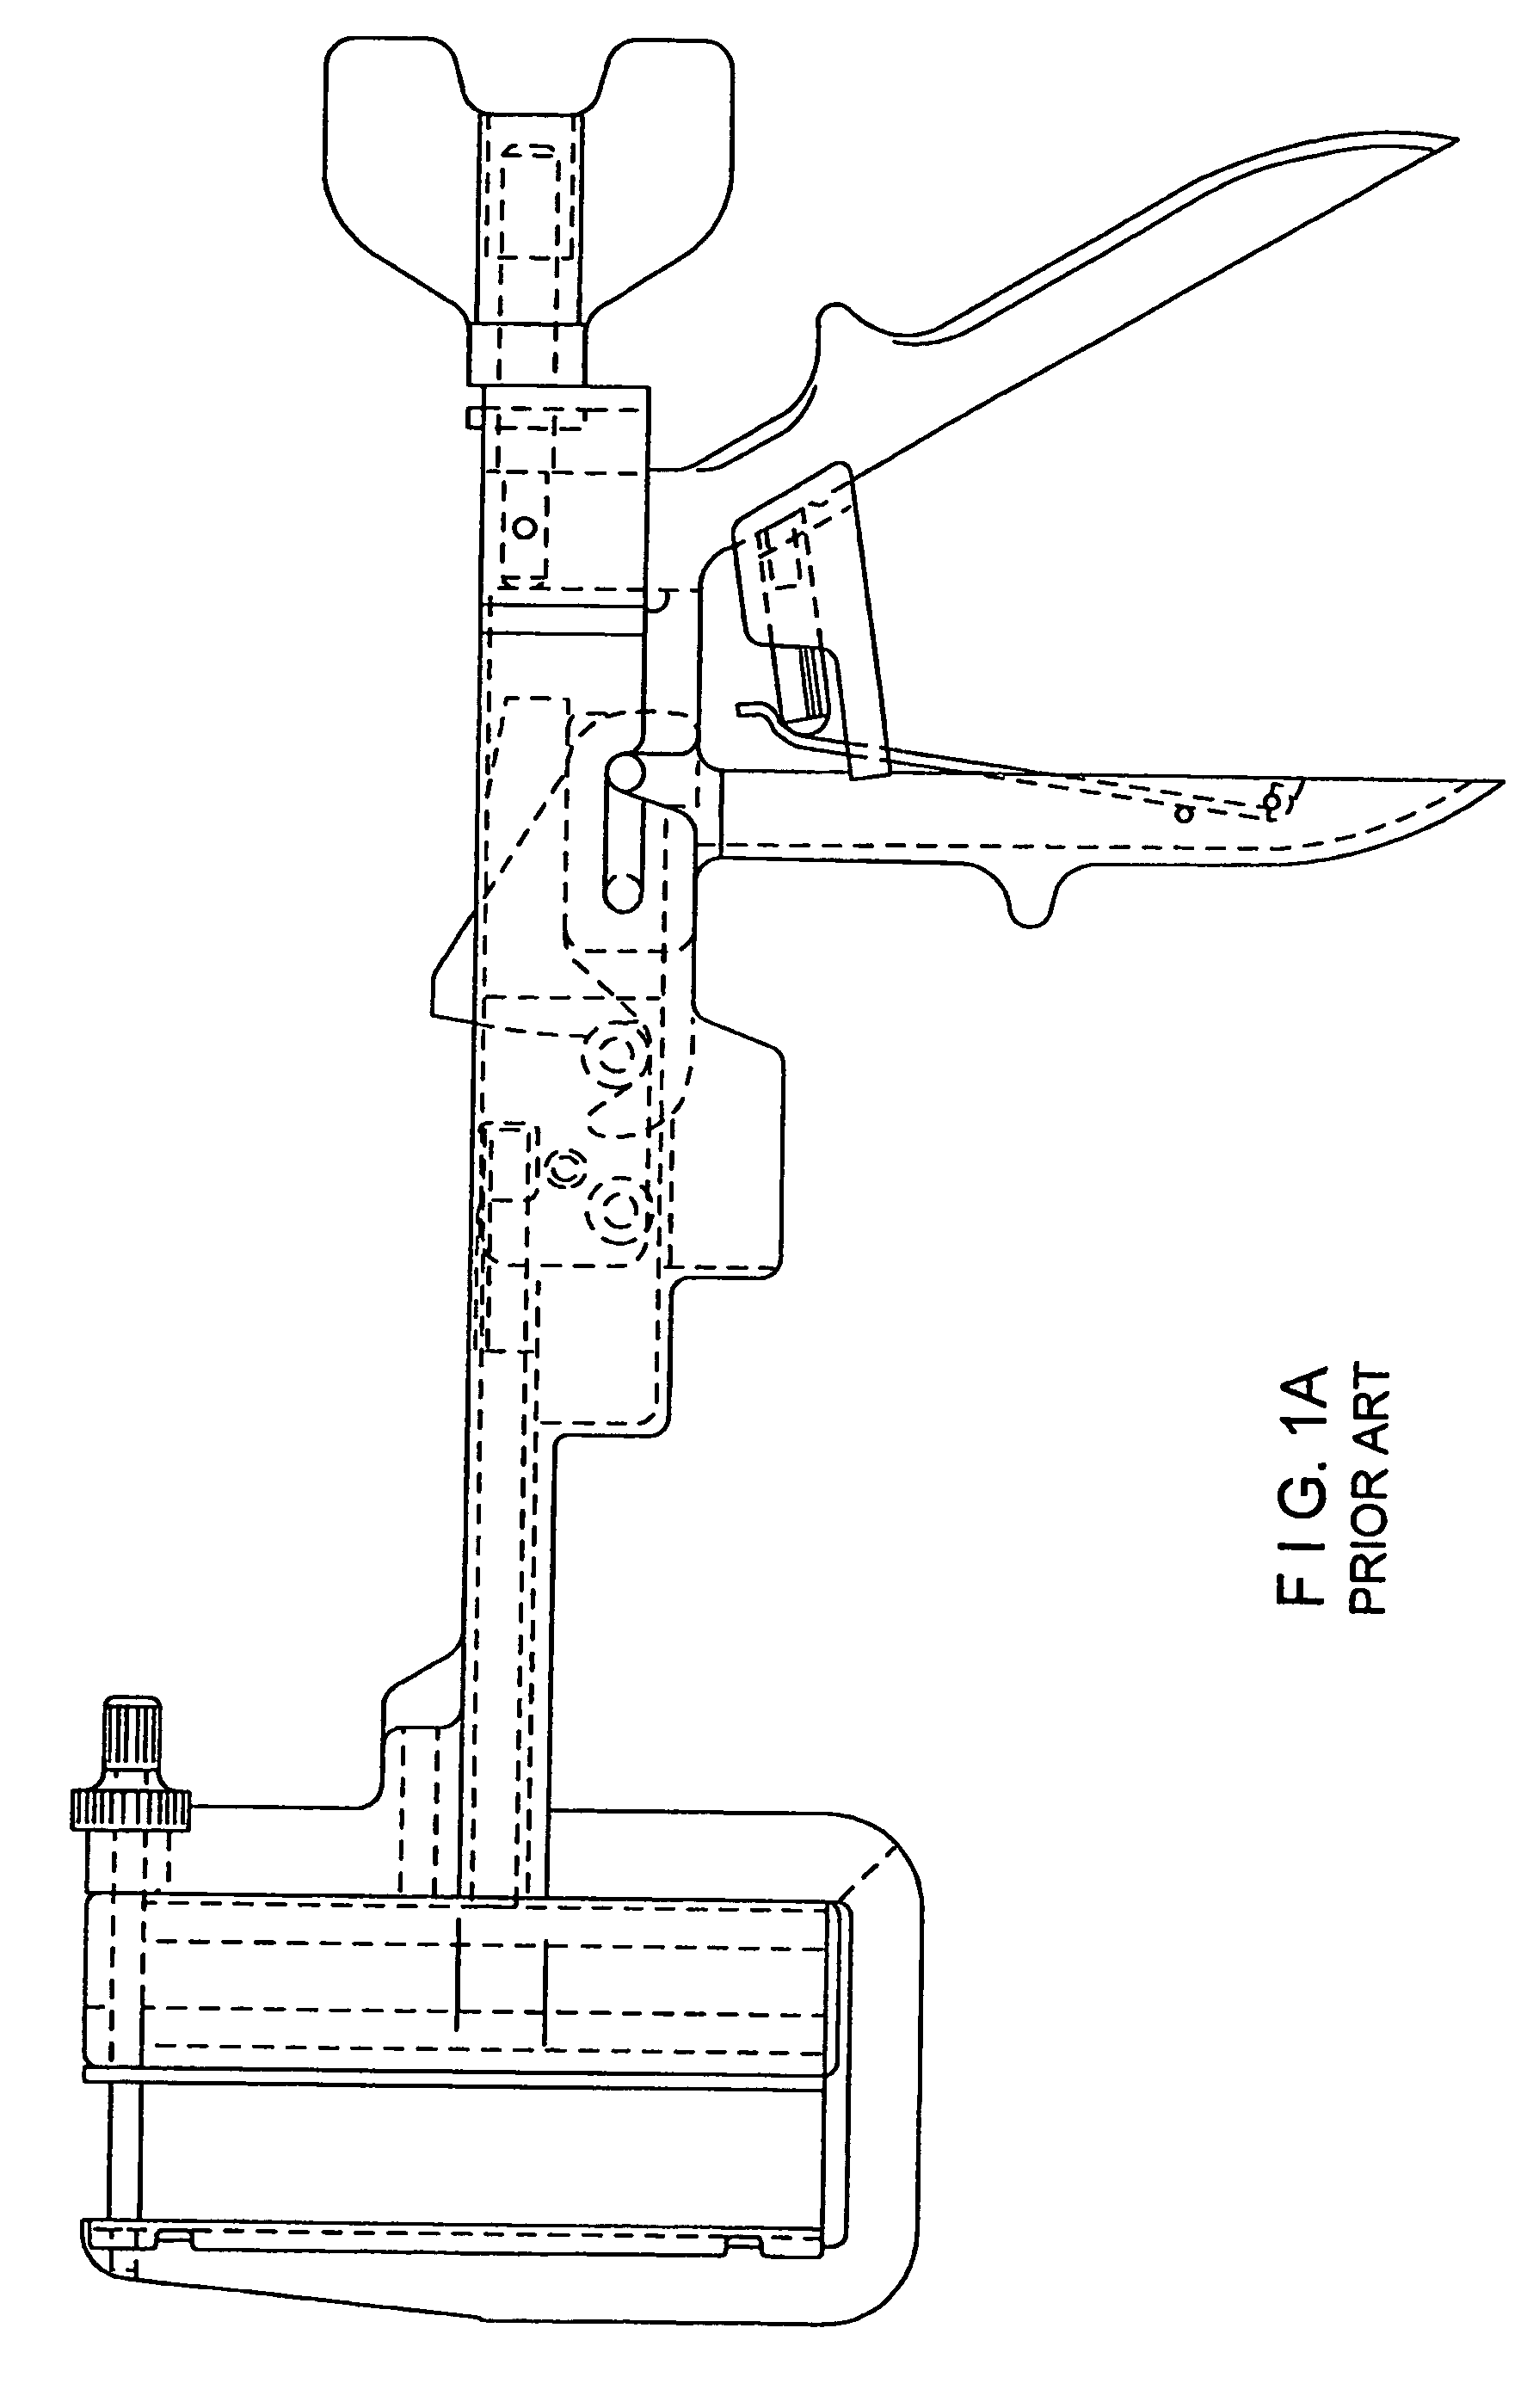 Surgical device